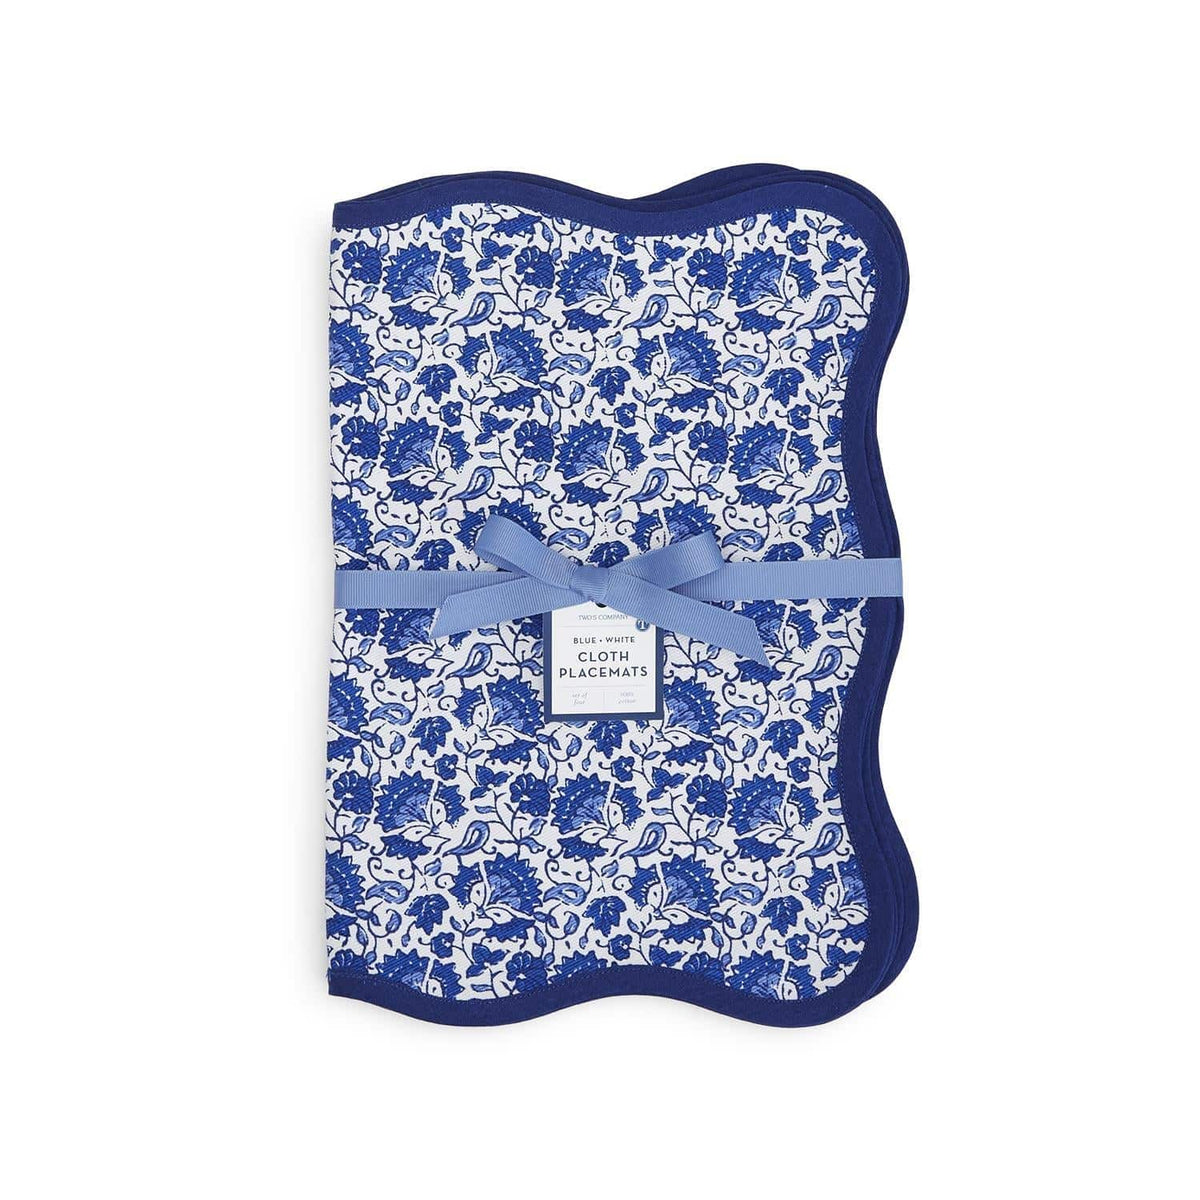 Blue Floral Scalloped Edge Trim Placemat - Set of 4 - The Preppy Bunny